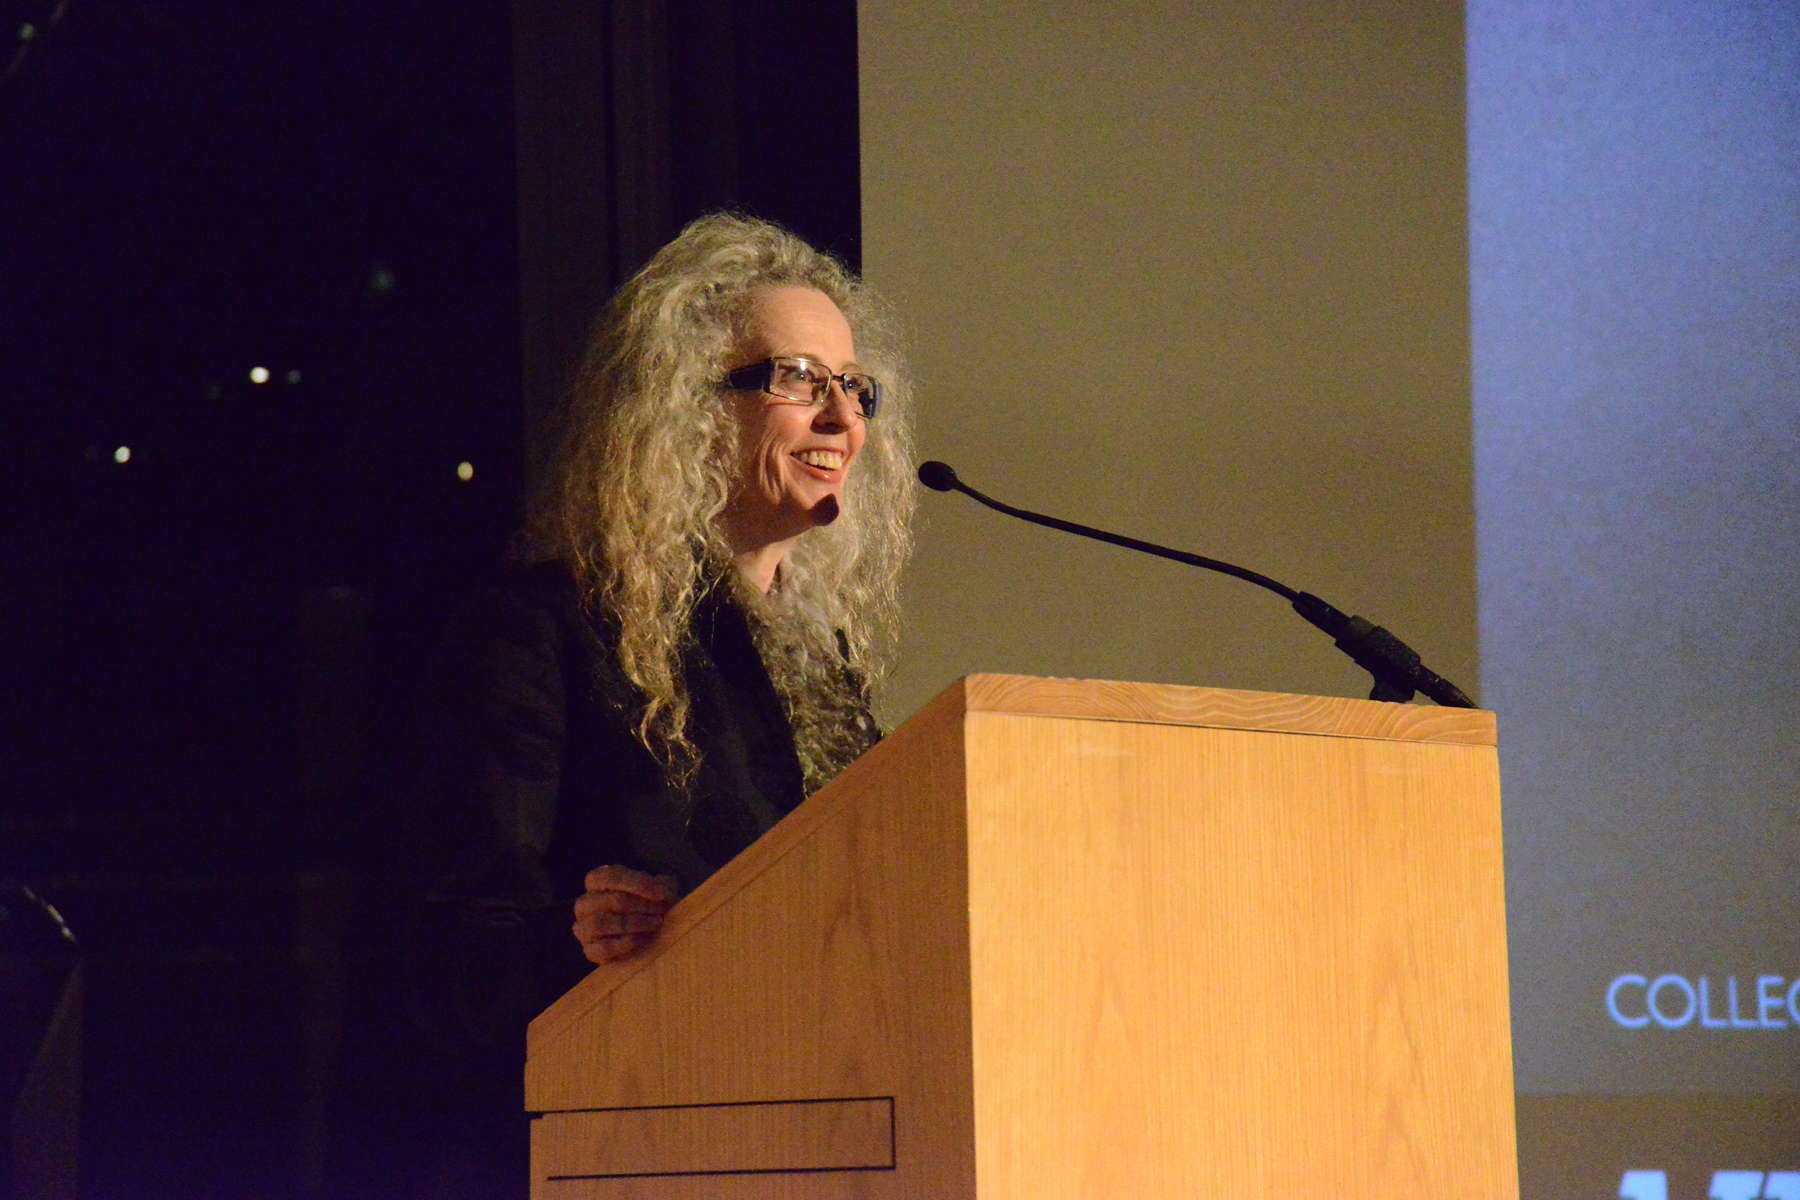 2013129-unt-nasher-lecture-kiki-smith-on-stage-left-side